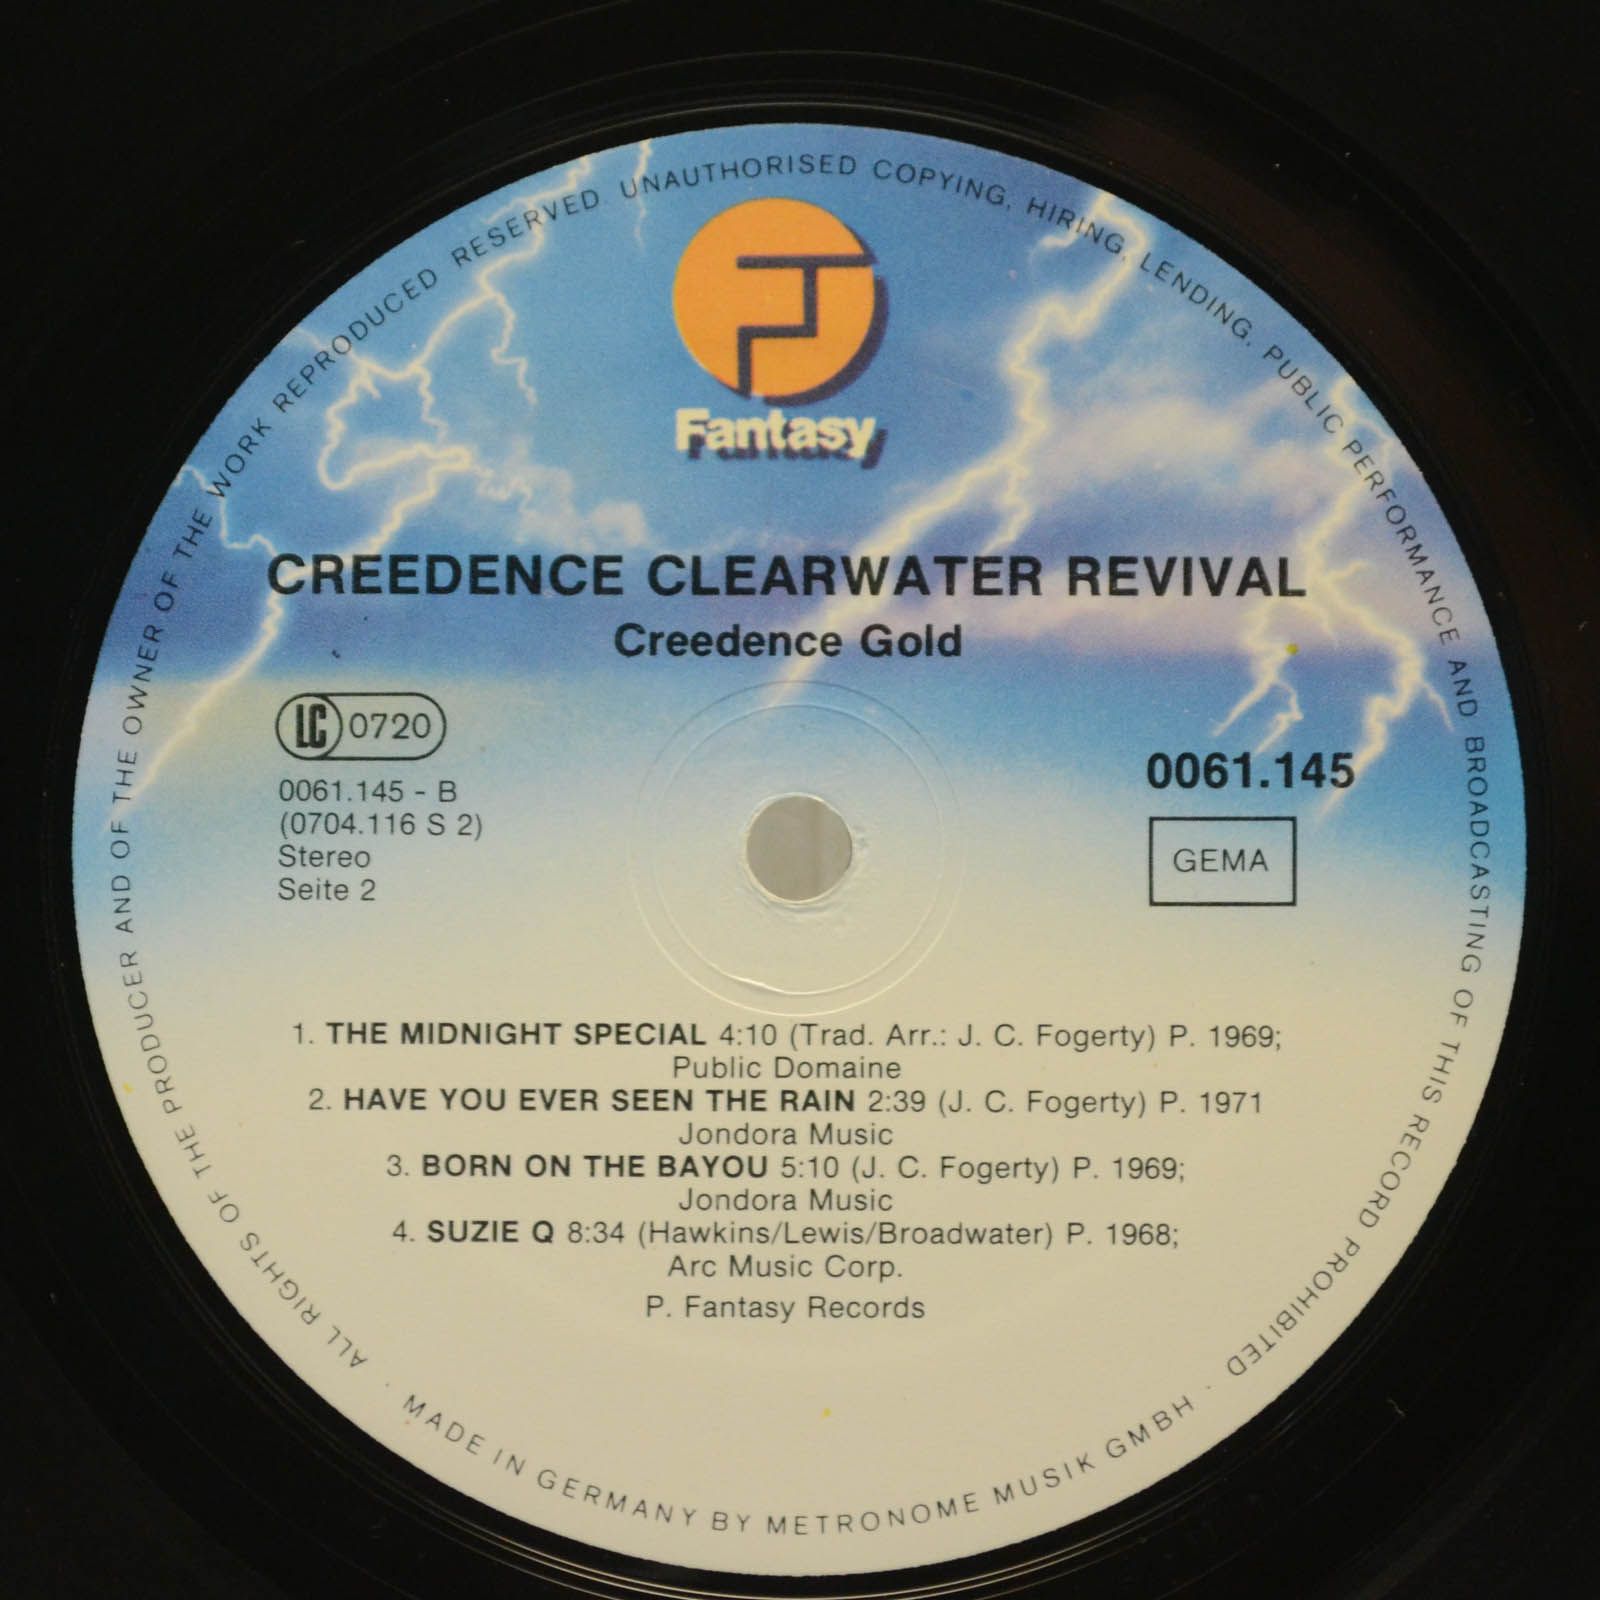 Creedence Clearwater Revival — Creedence Gold, 1972